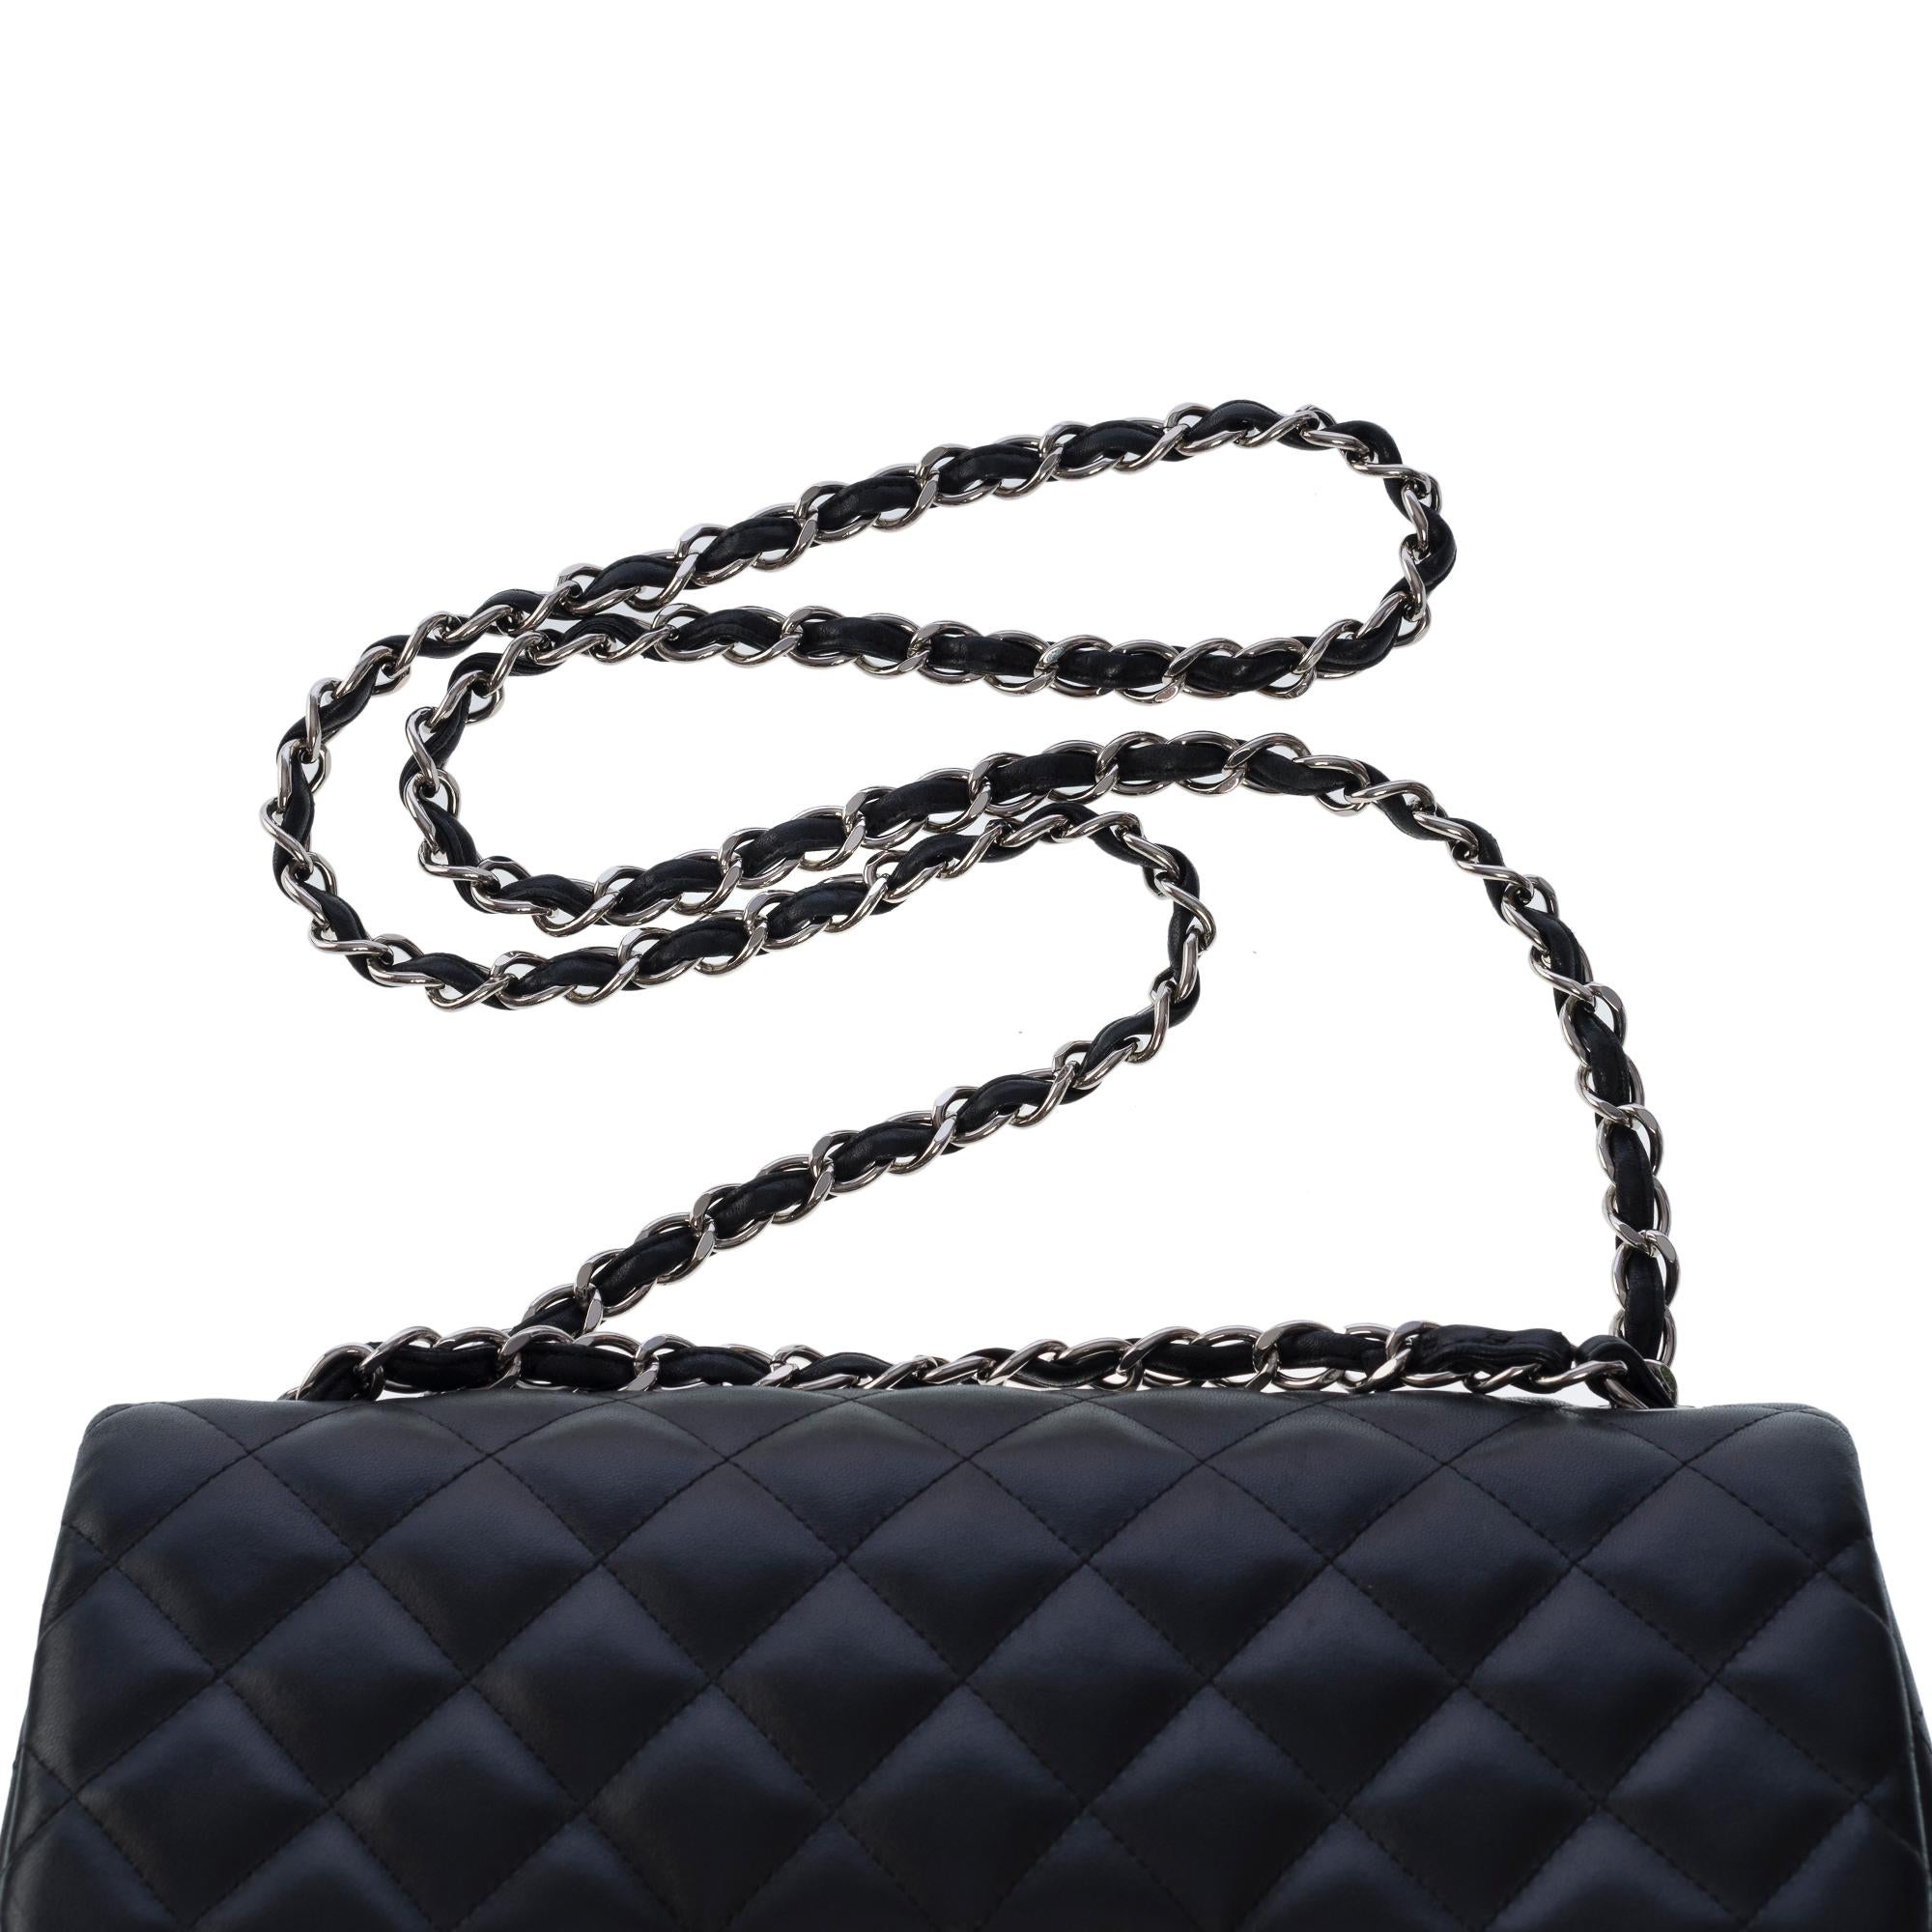 Chanel Timeless Jumbo double flap shoulder bag in black quilted lambskin , SHW For Sale 5